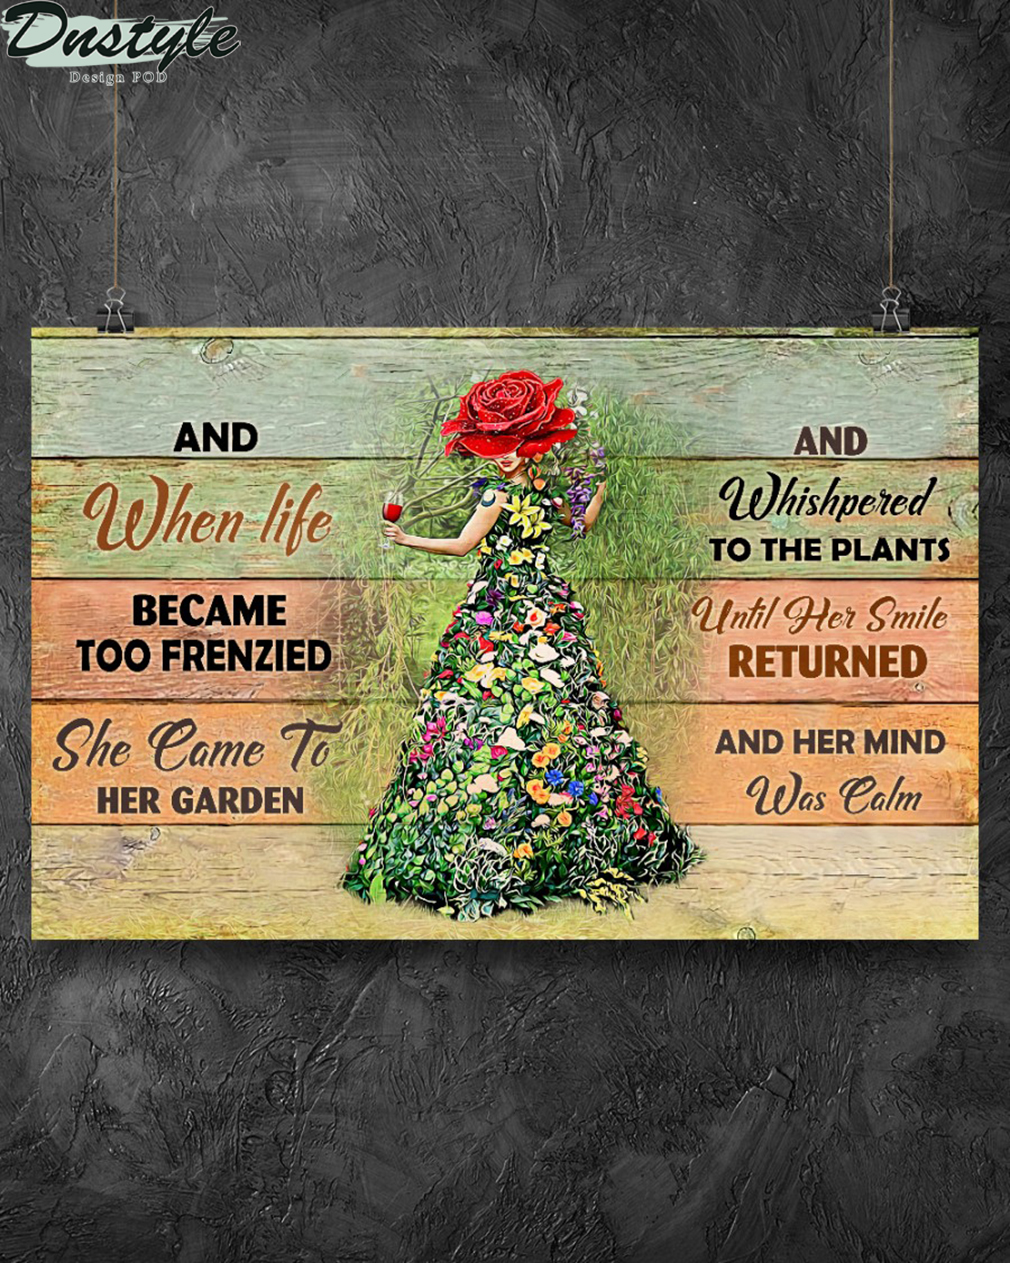 Garden girl and when life became too frenzied poster